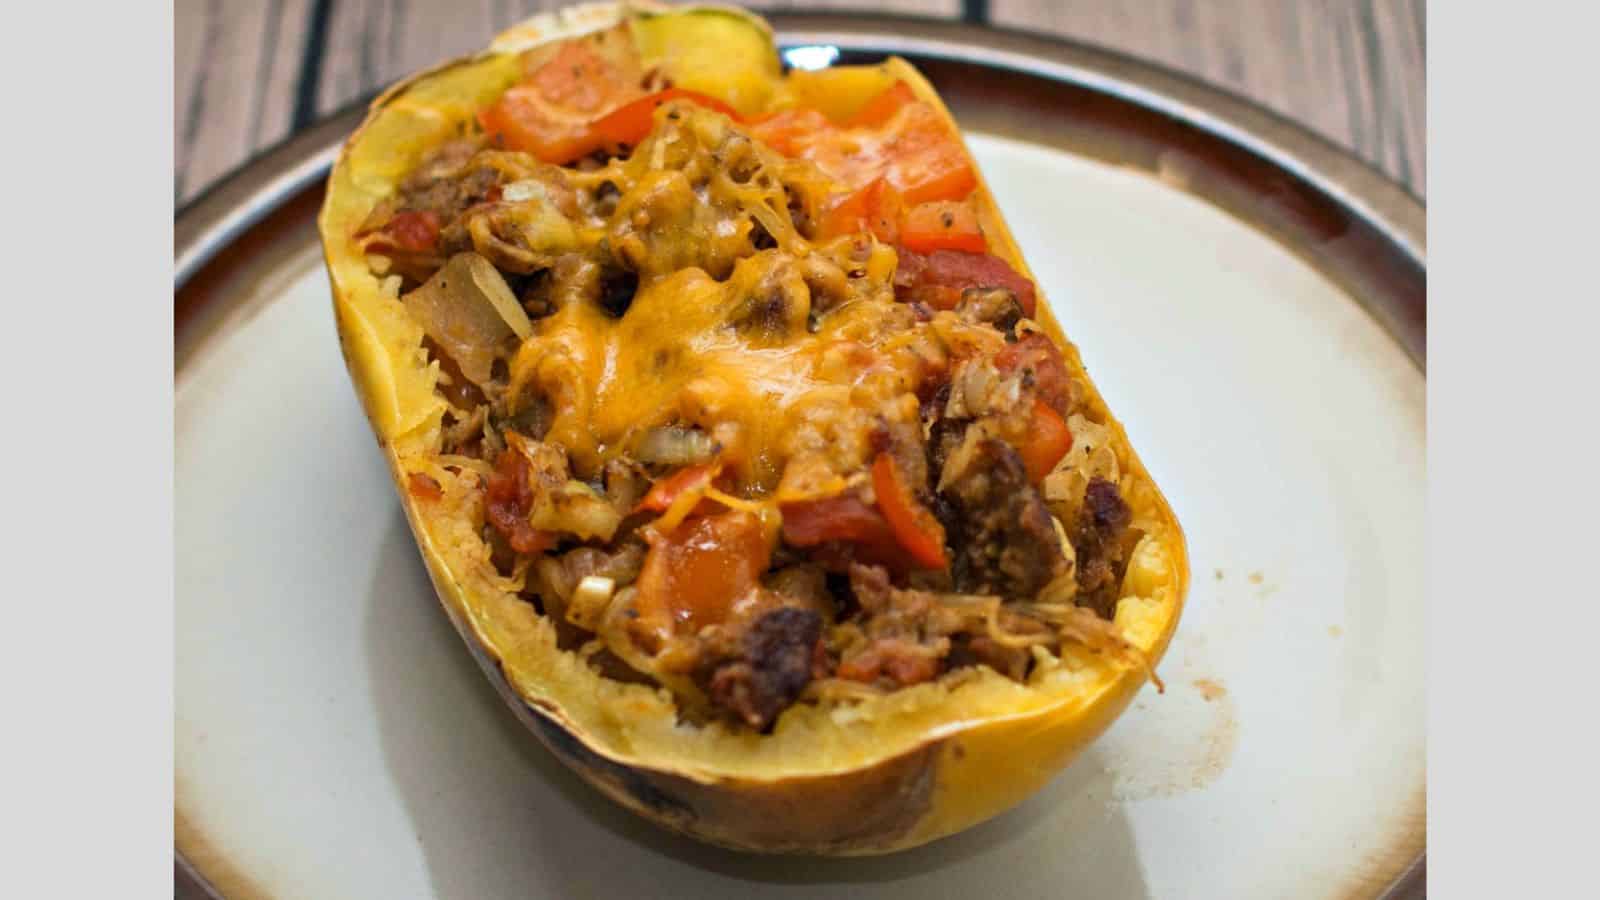 Stuffed squash with meat and cheese on a plate.